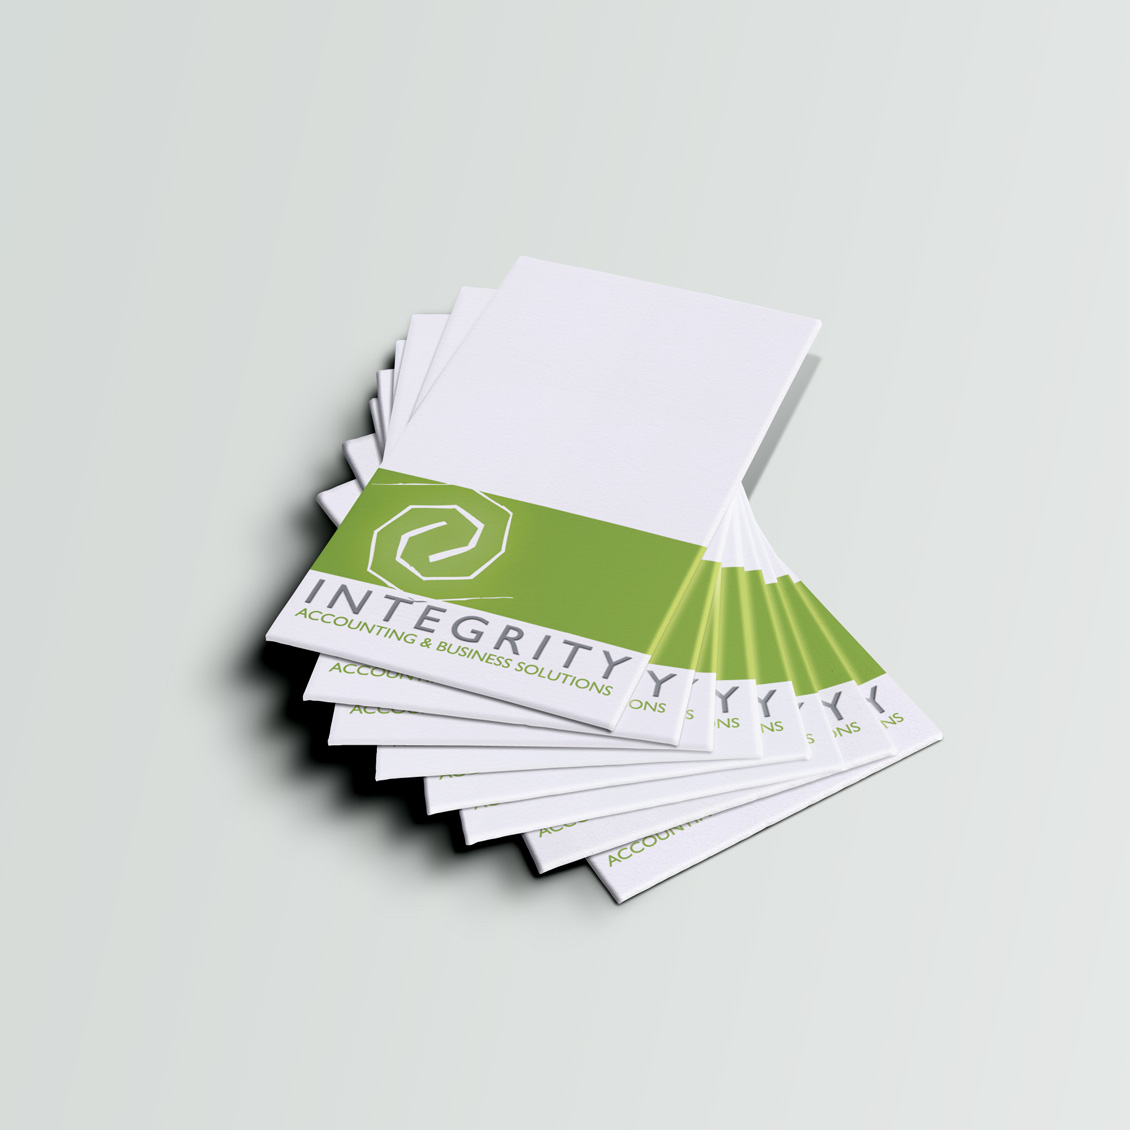 Integrity Accounting and Business Solutions Business Cards